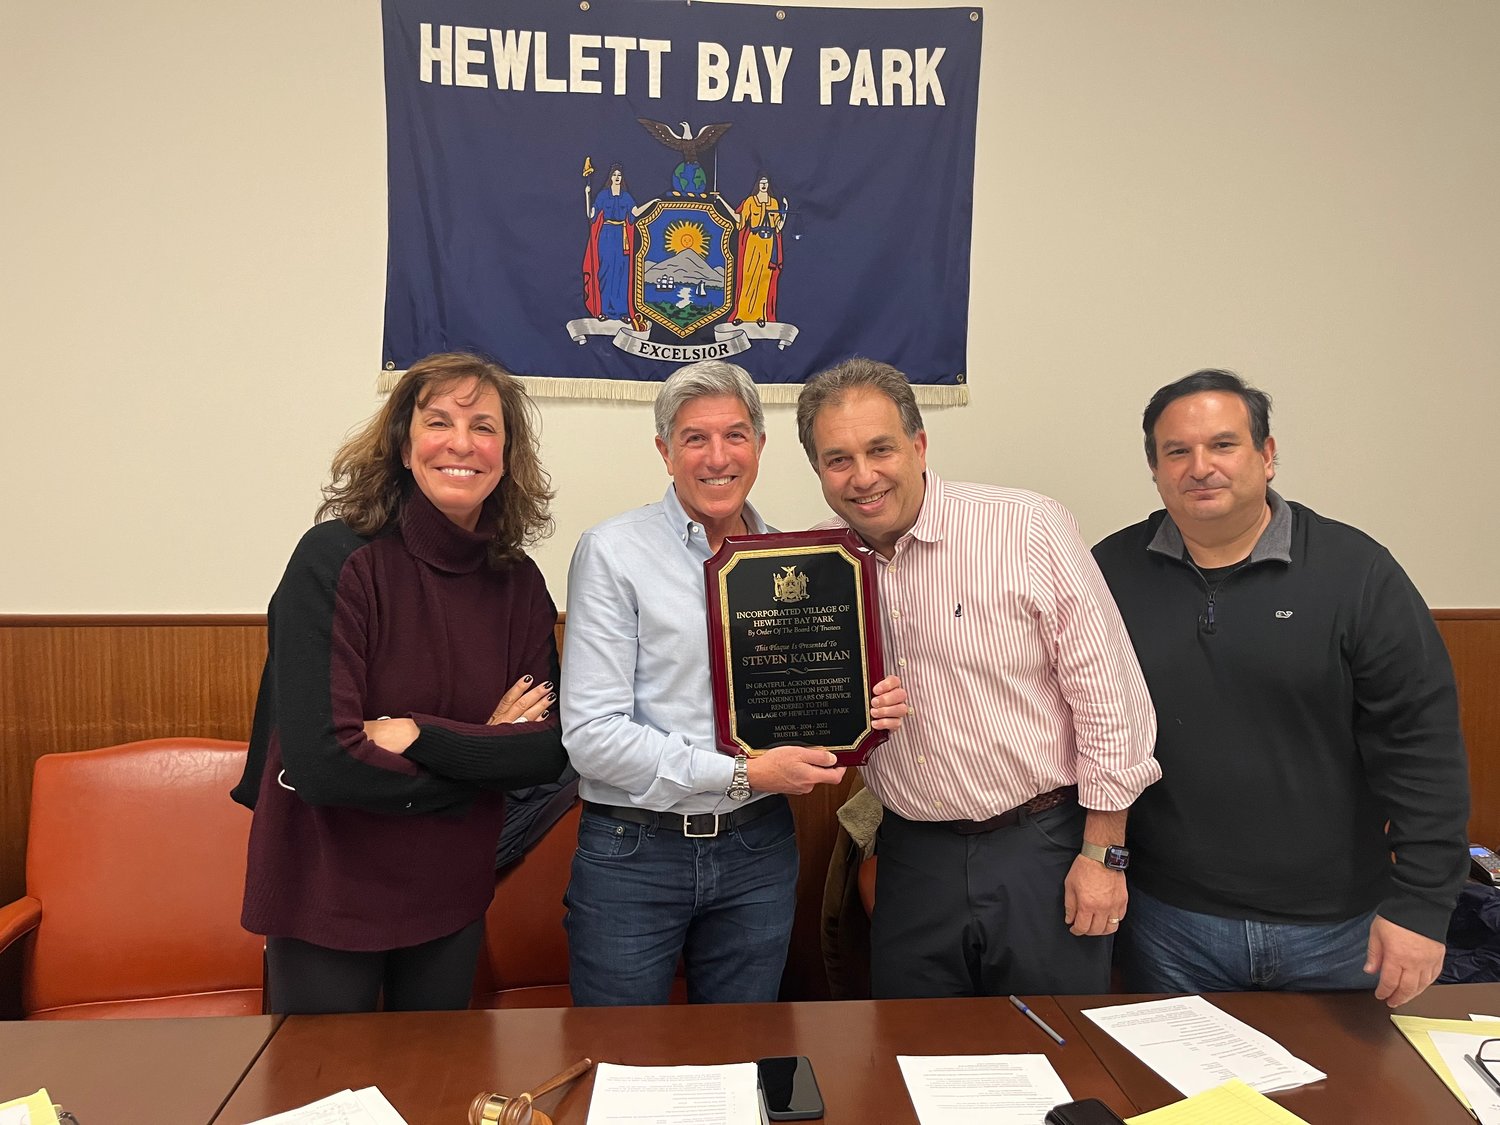 After 30 years in Hewlett Bay Park — including more than half of that as village mayor — Steven Kaufman has stepped down. Joining him at his final village meeting March 3 were, from left, Trustee Gail Rubel, newly appointed Mayor Alex Salomon, and Trustee Antonio Oliviero.